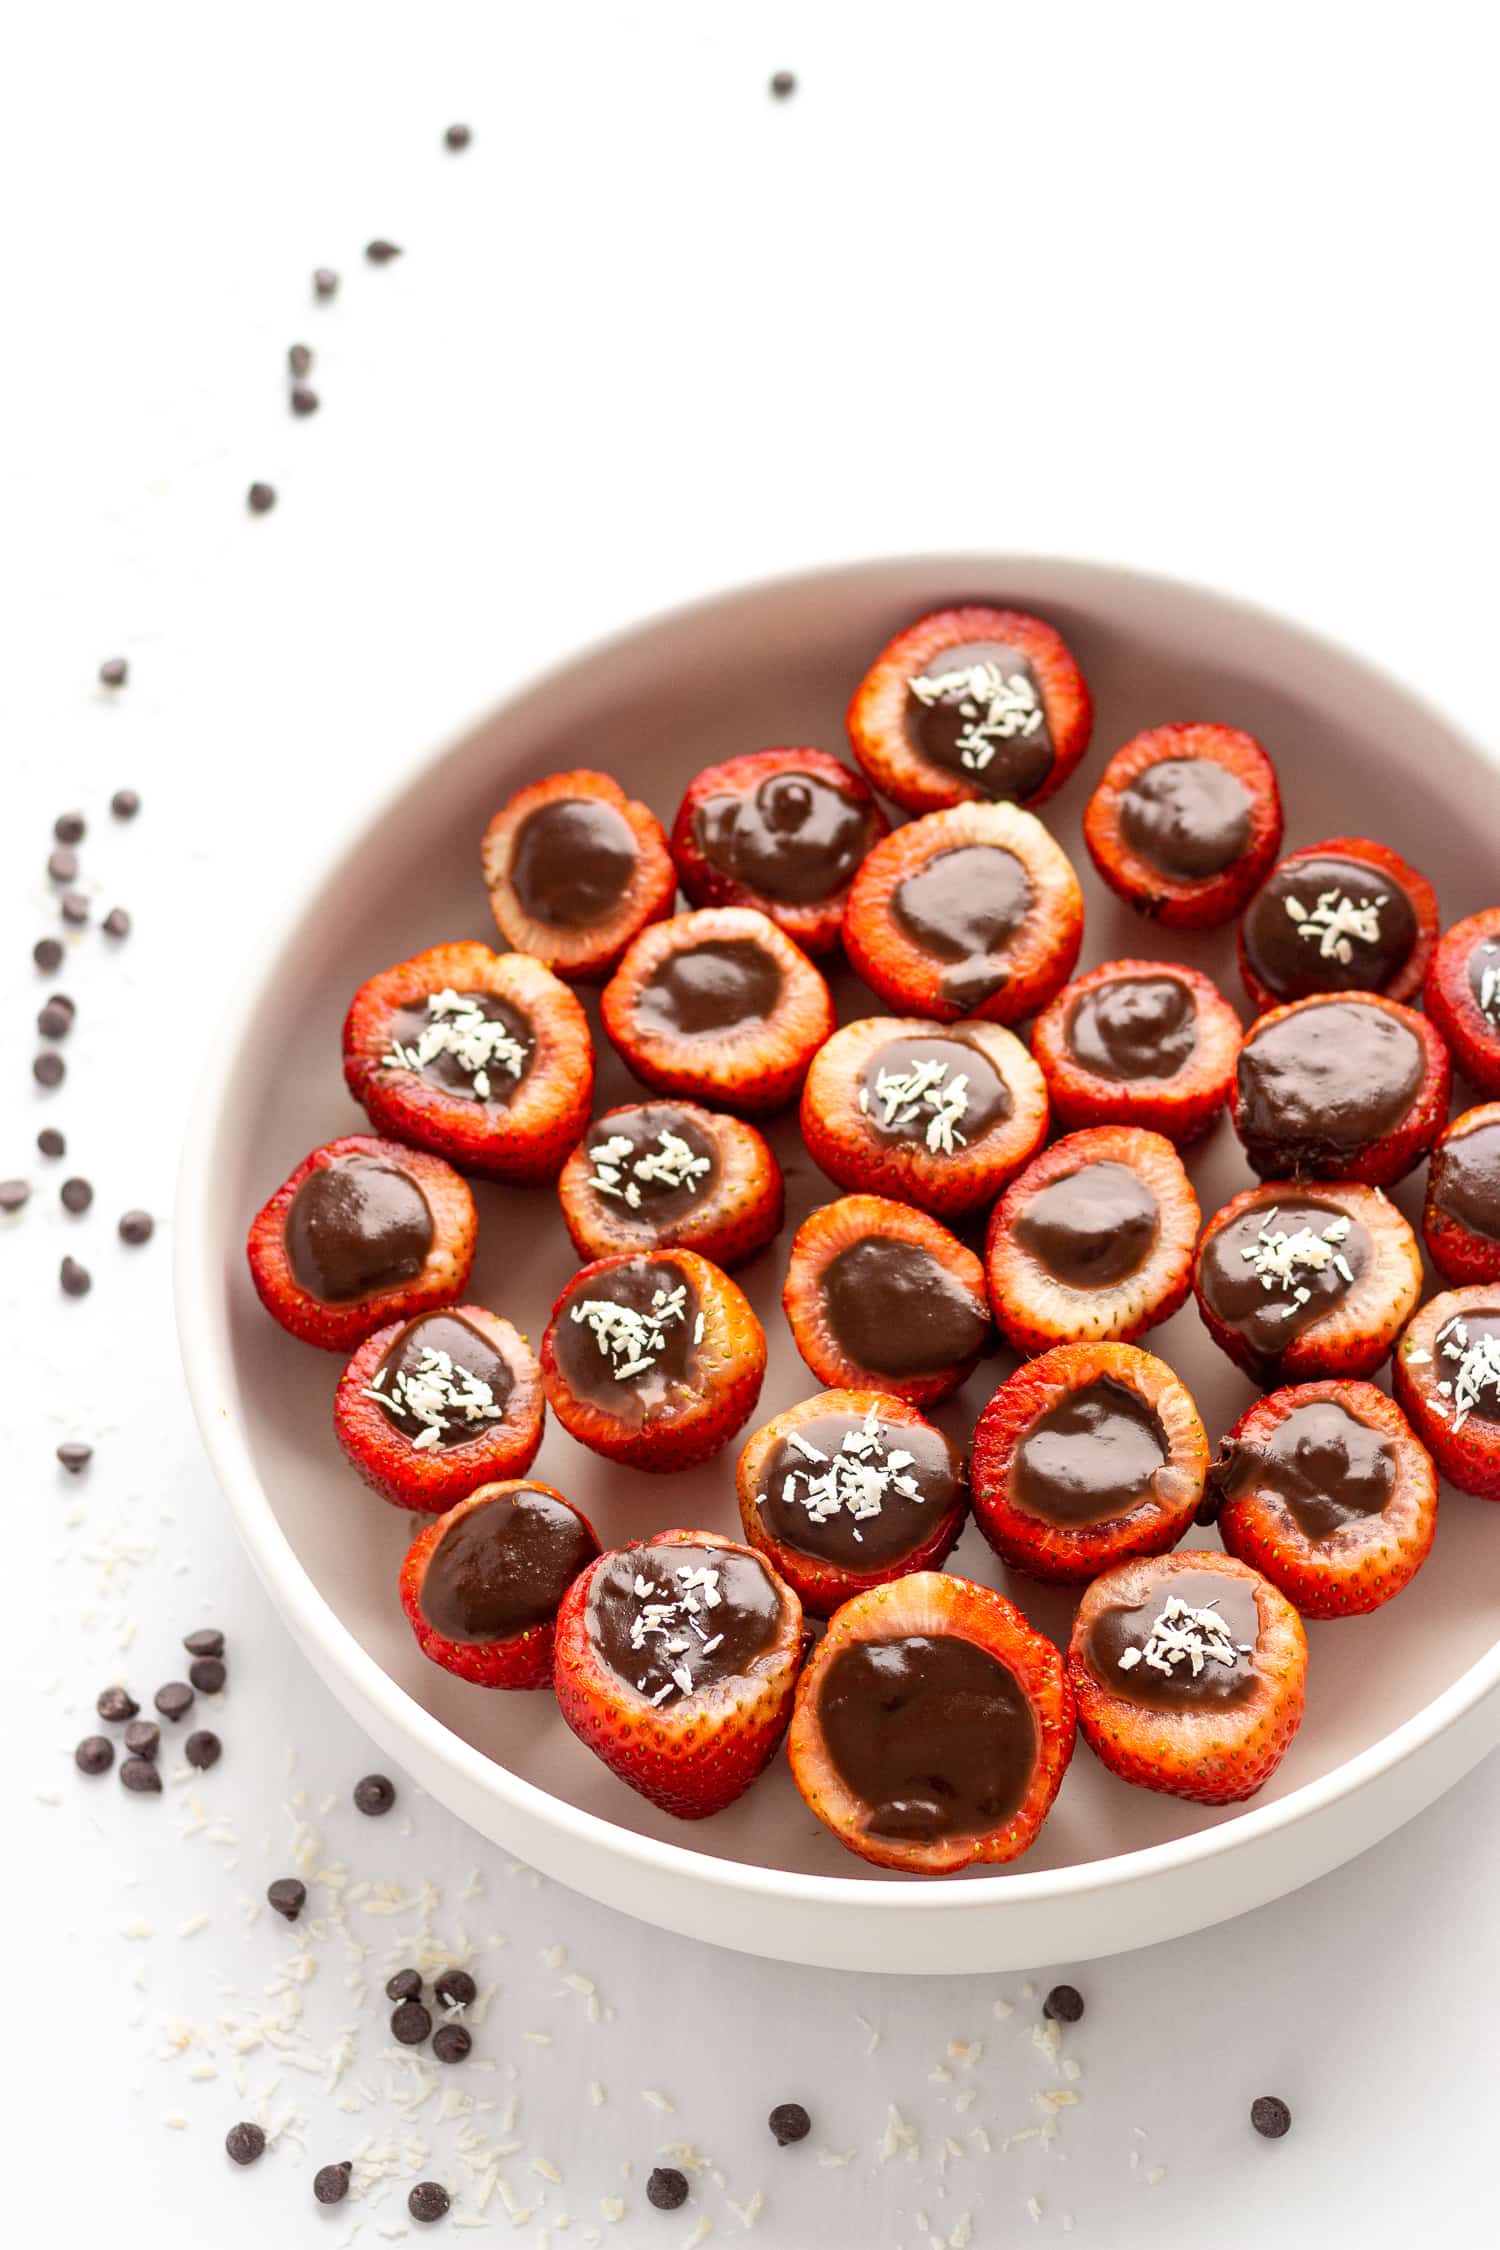 White bowl filled with chocolate coconut cream stuffed strawberries.  Set on a white background with a scattering of chocolate chips and shredded coconut.